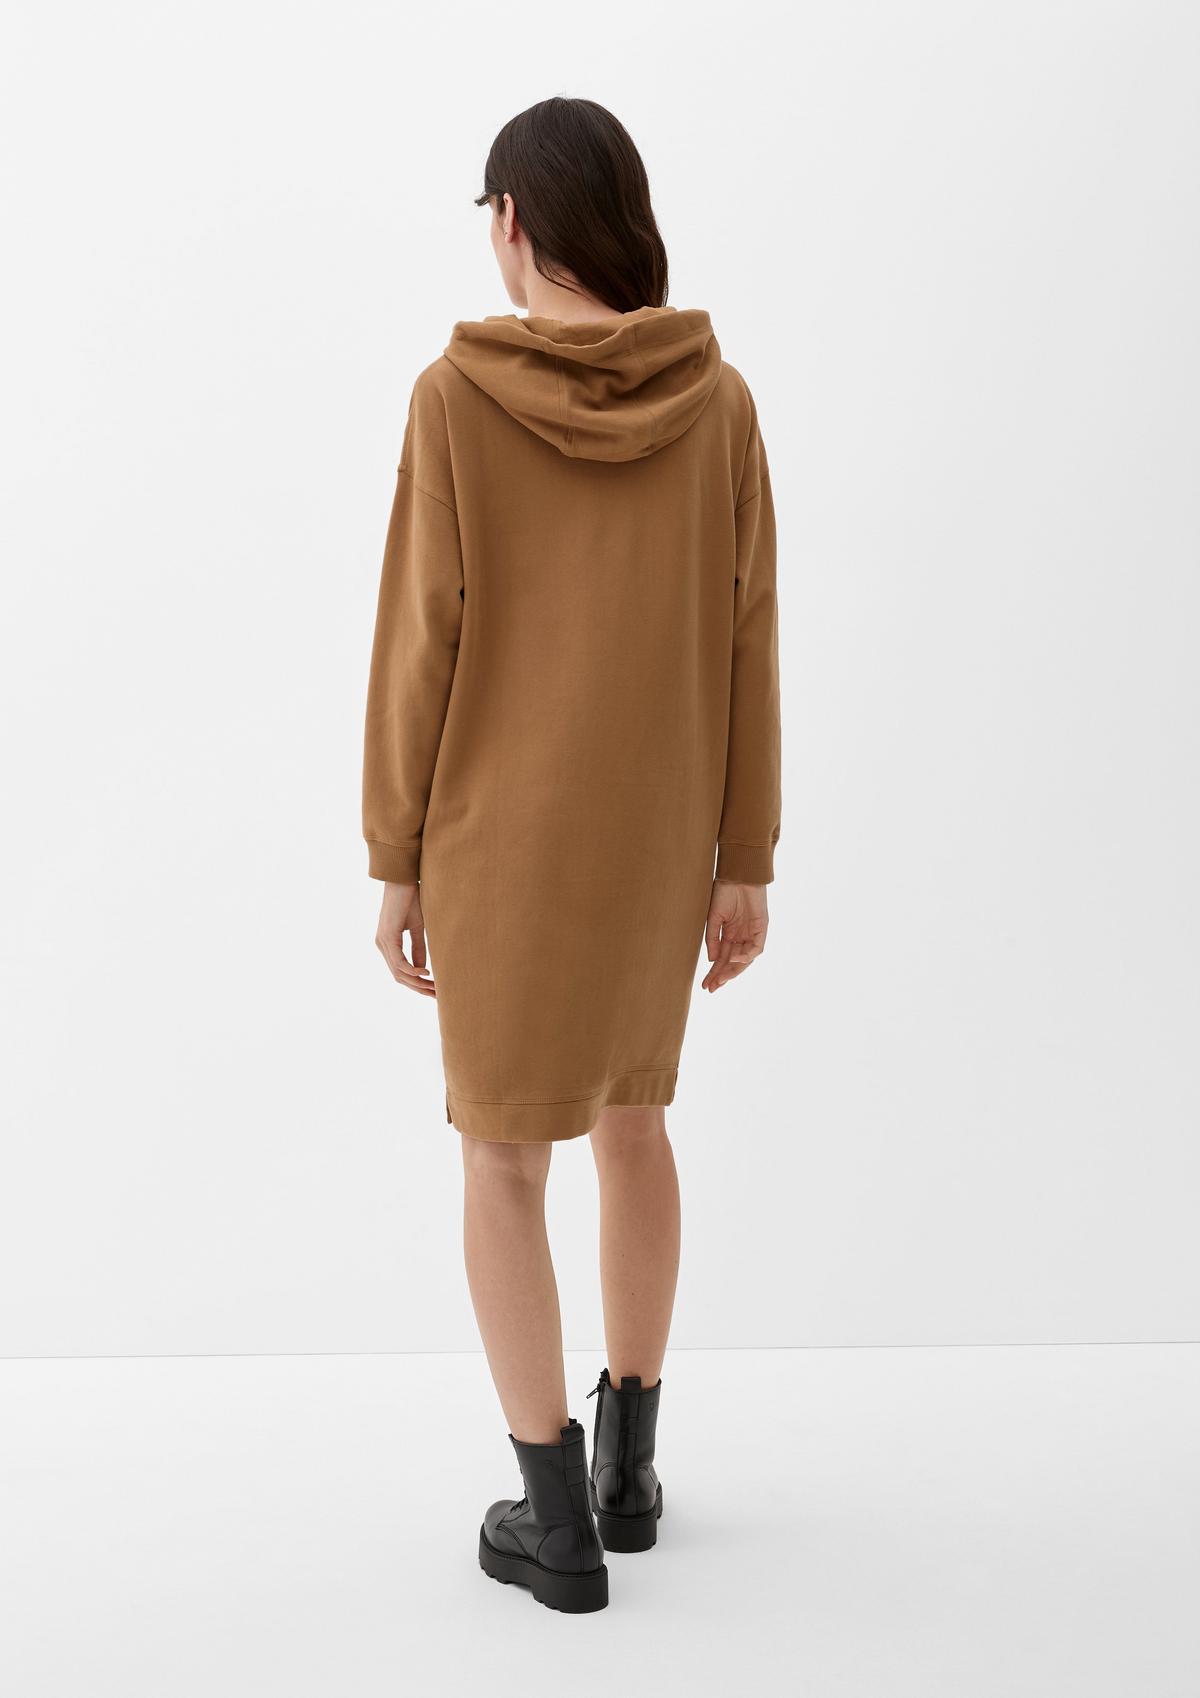 s.Oliver Sweatshirt dress in a loose fit